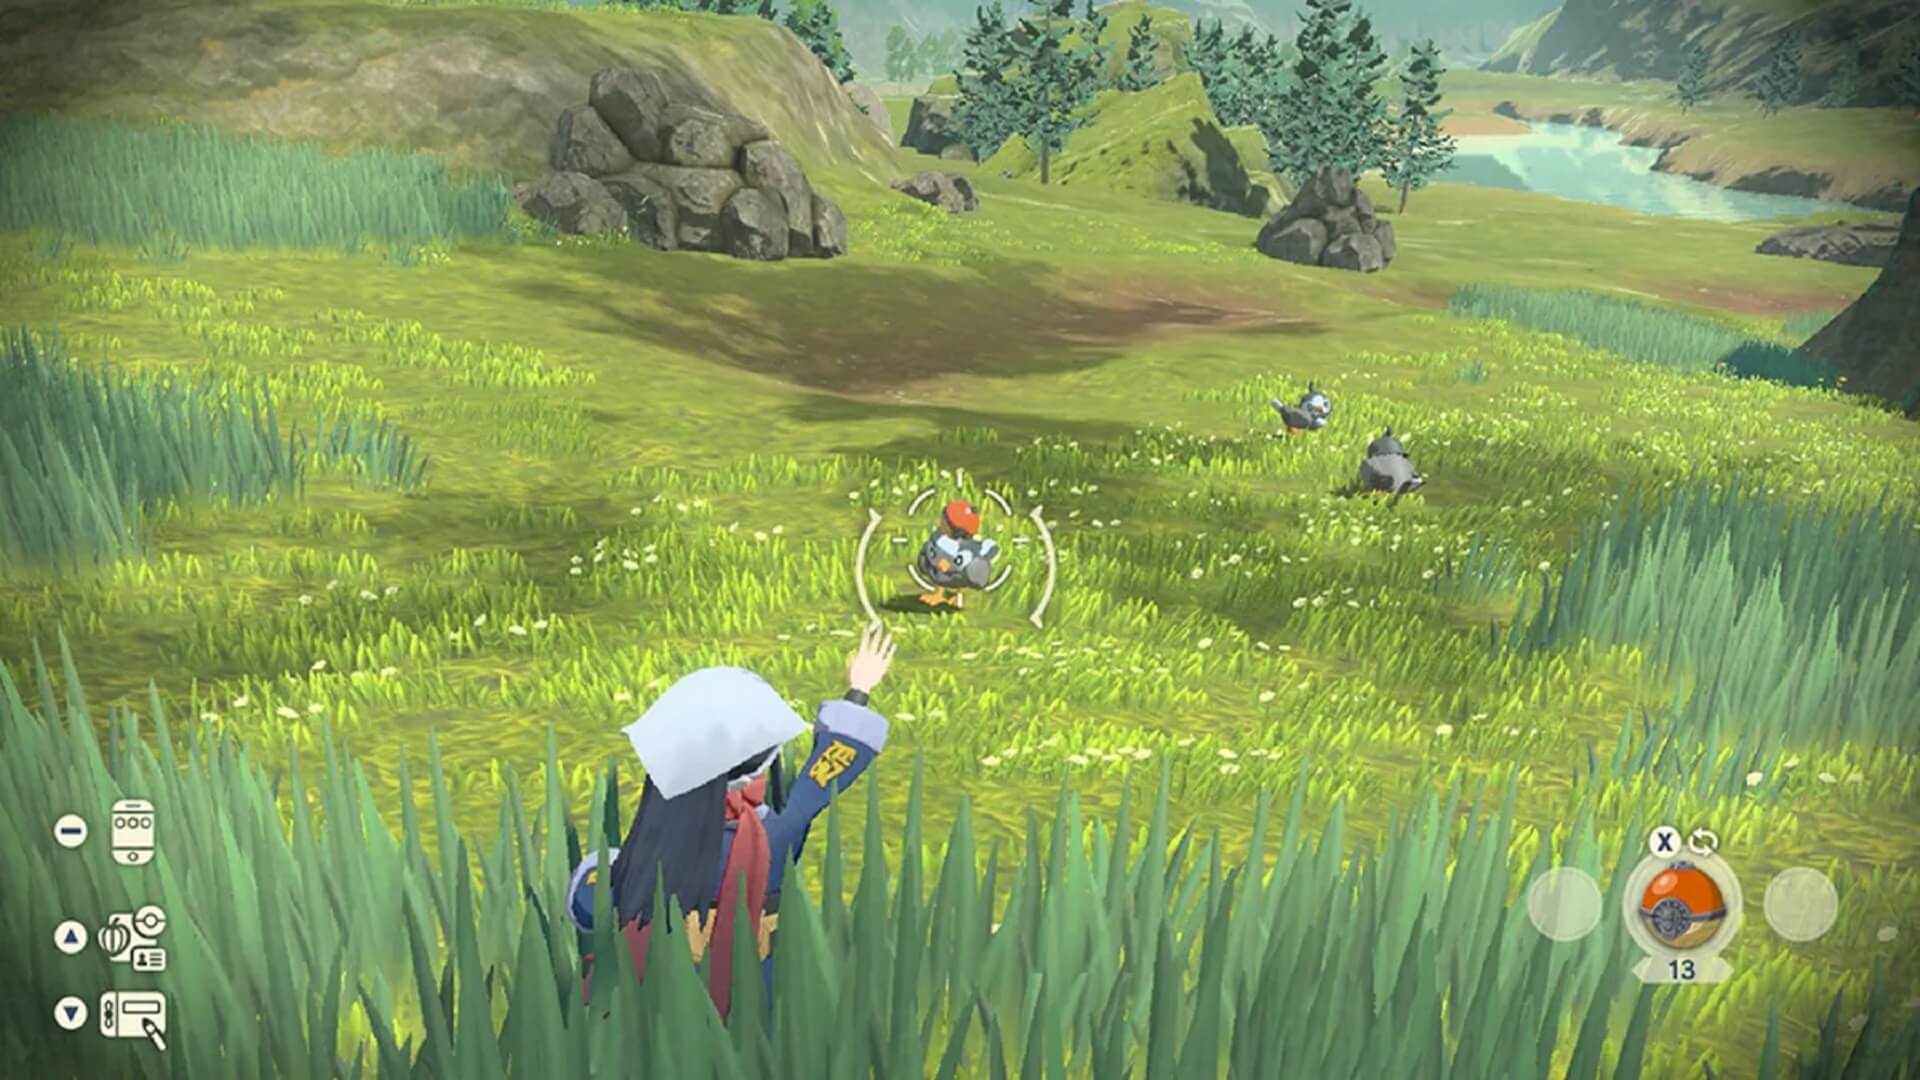 The player throwing a Poke Ball at Starly in Pokemon Legends Arceus